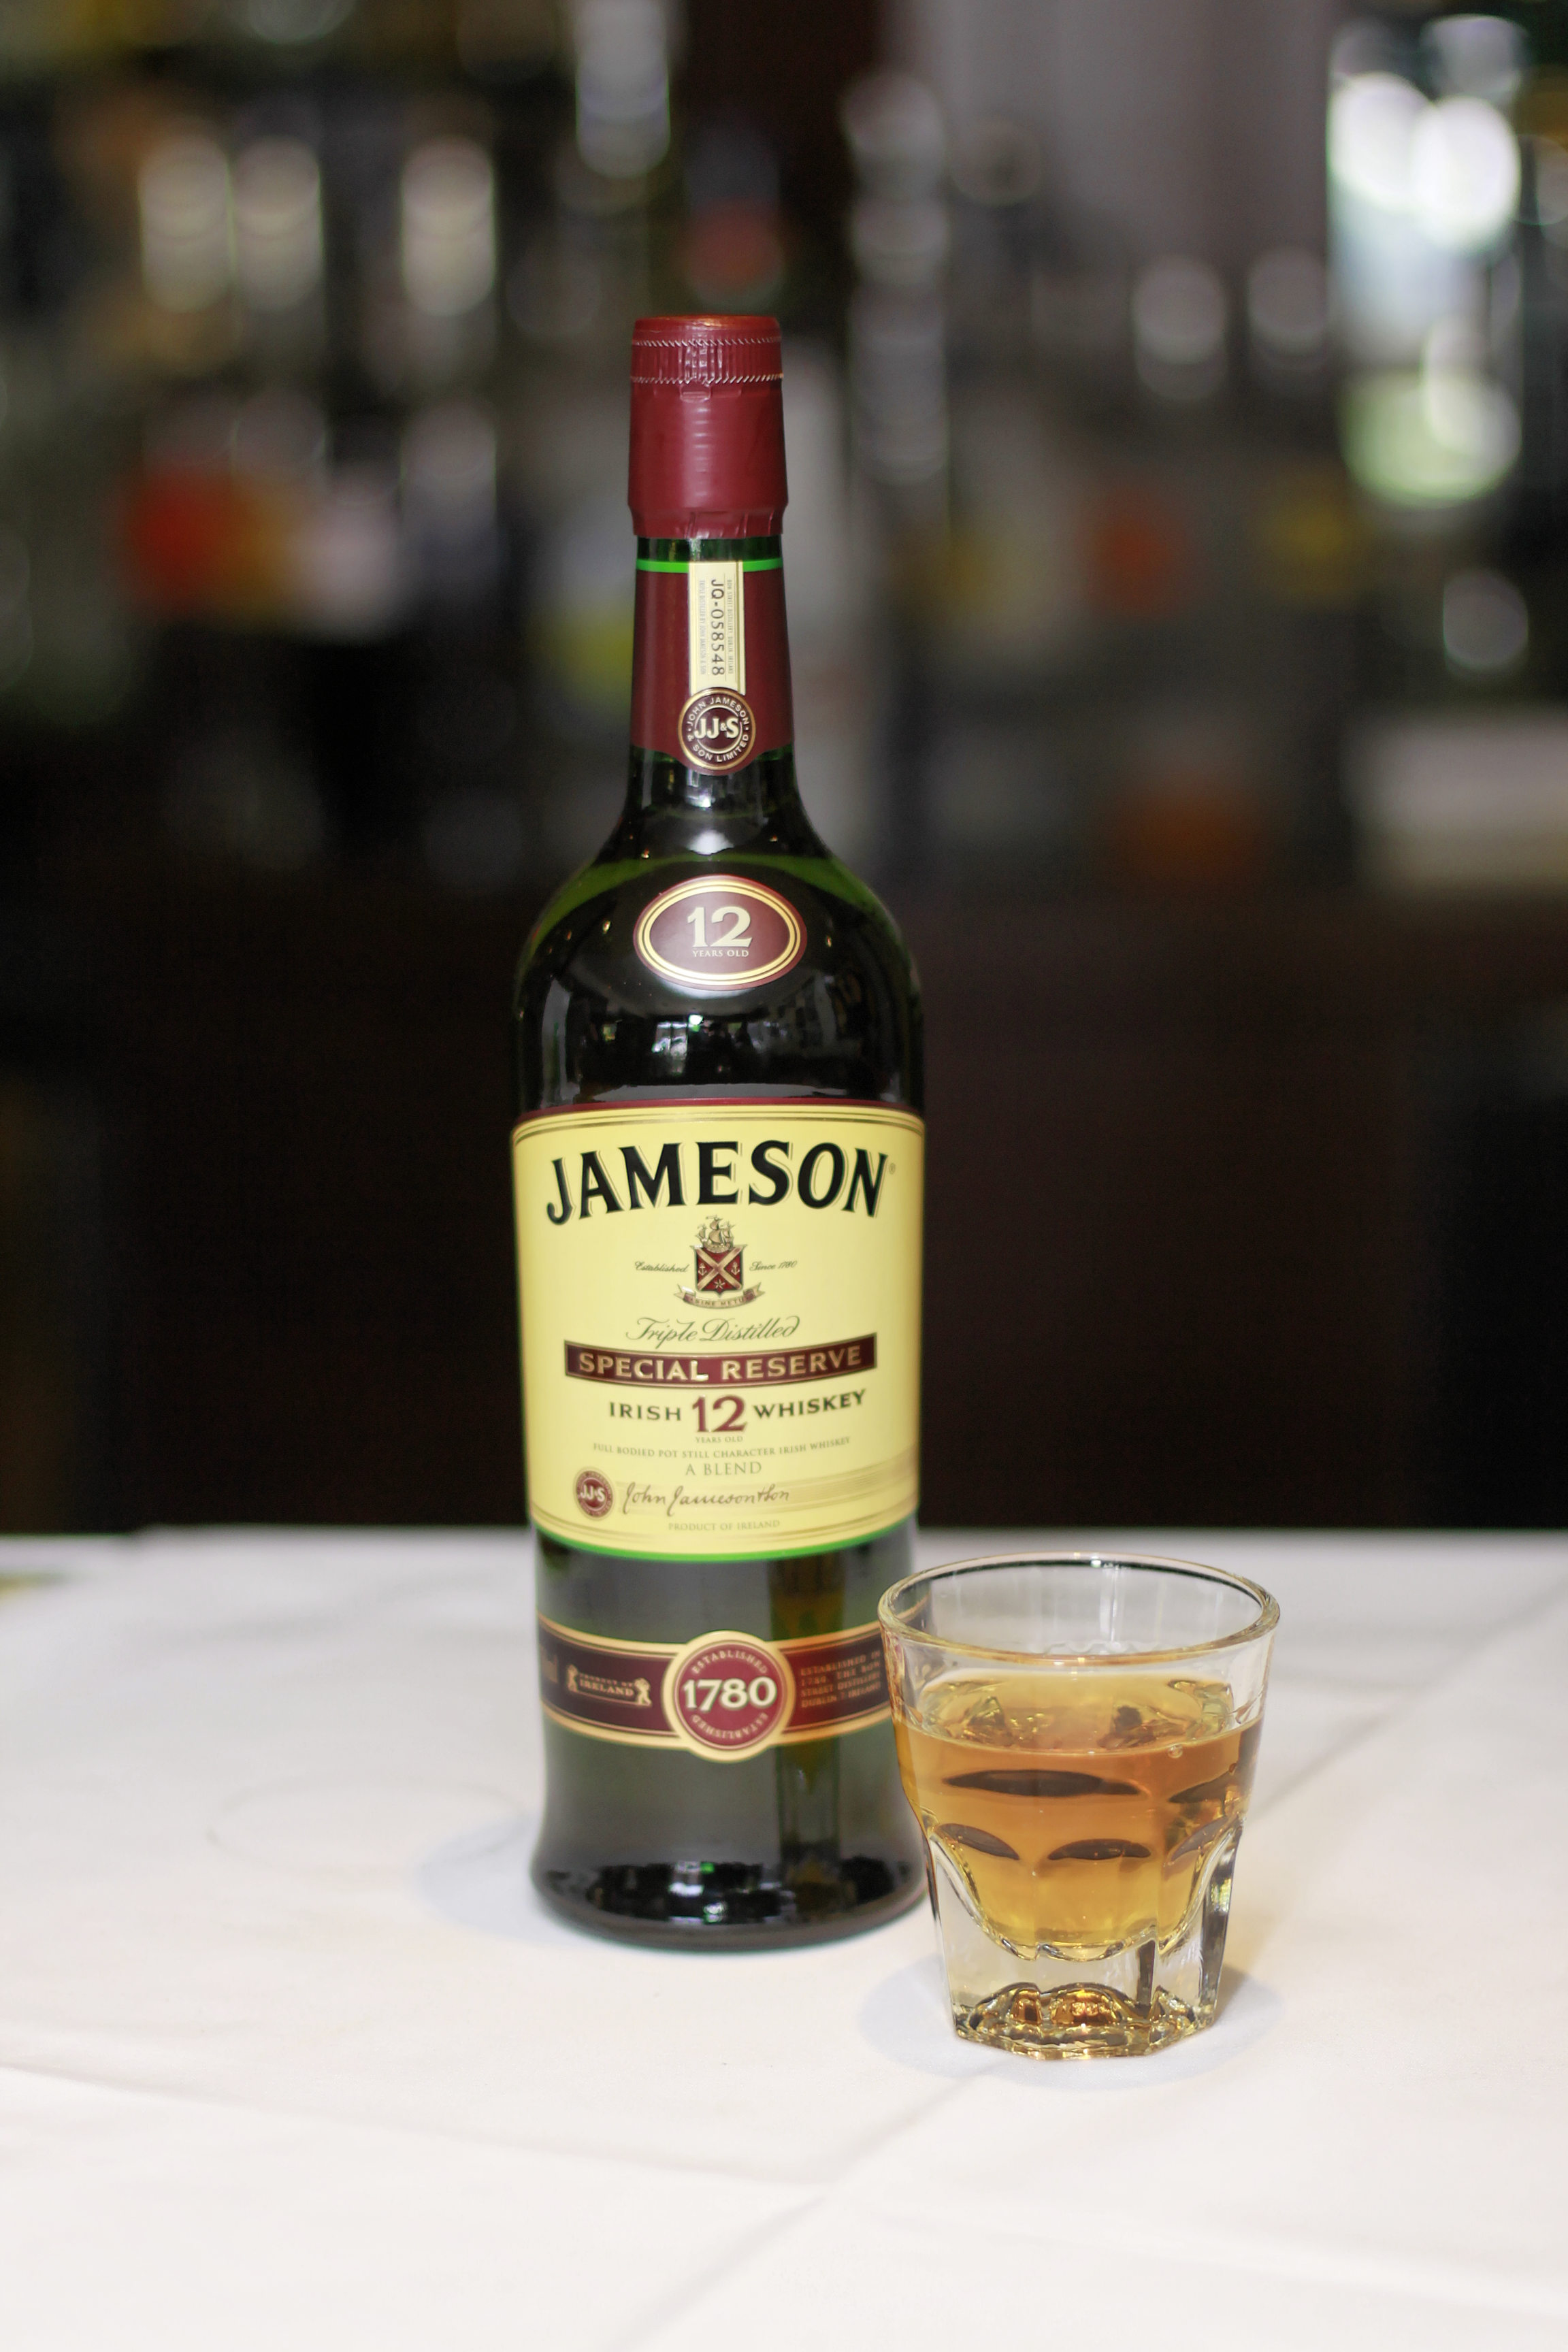 A Picture of a bottle of Jameson at Crogan's